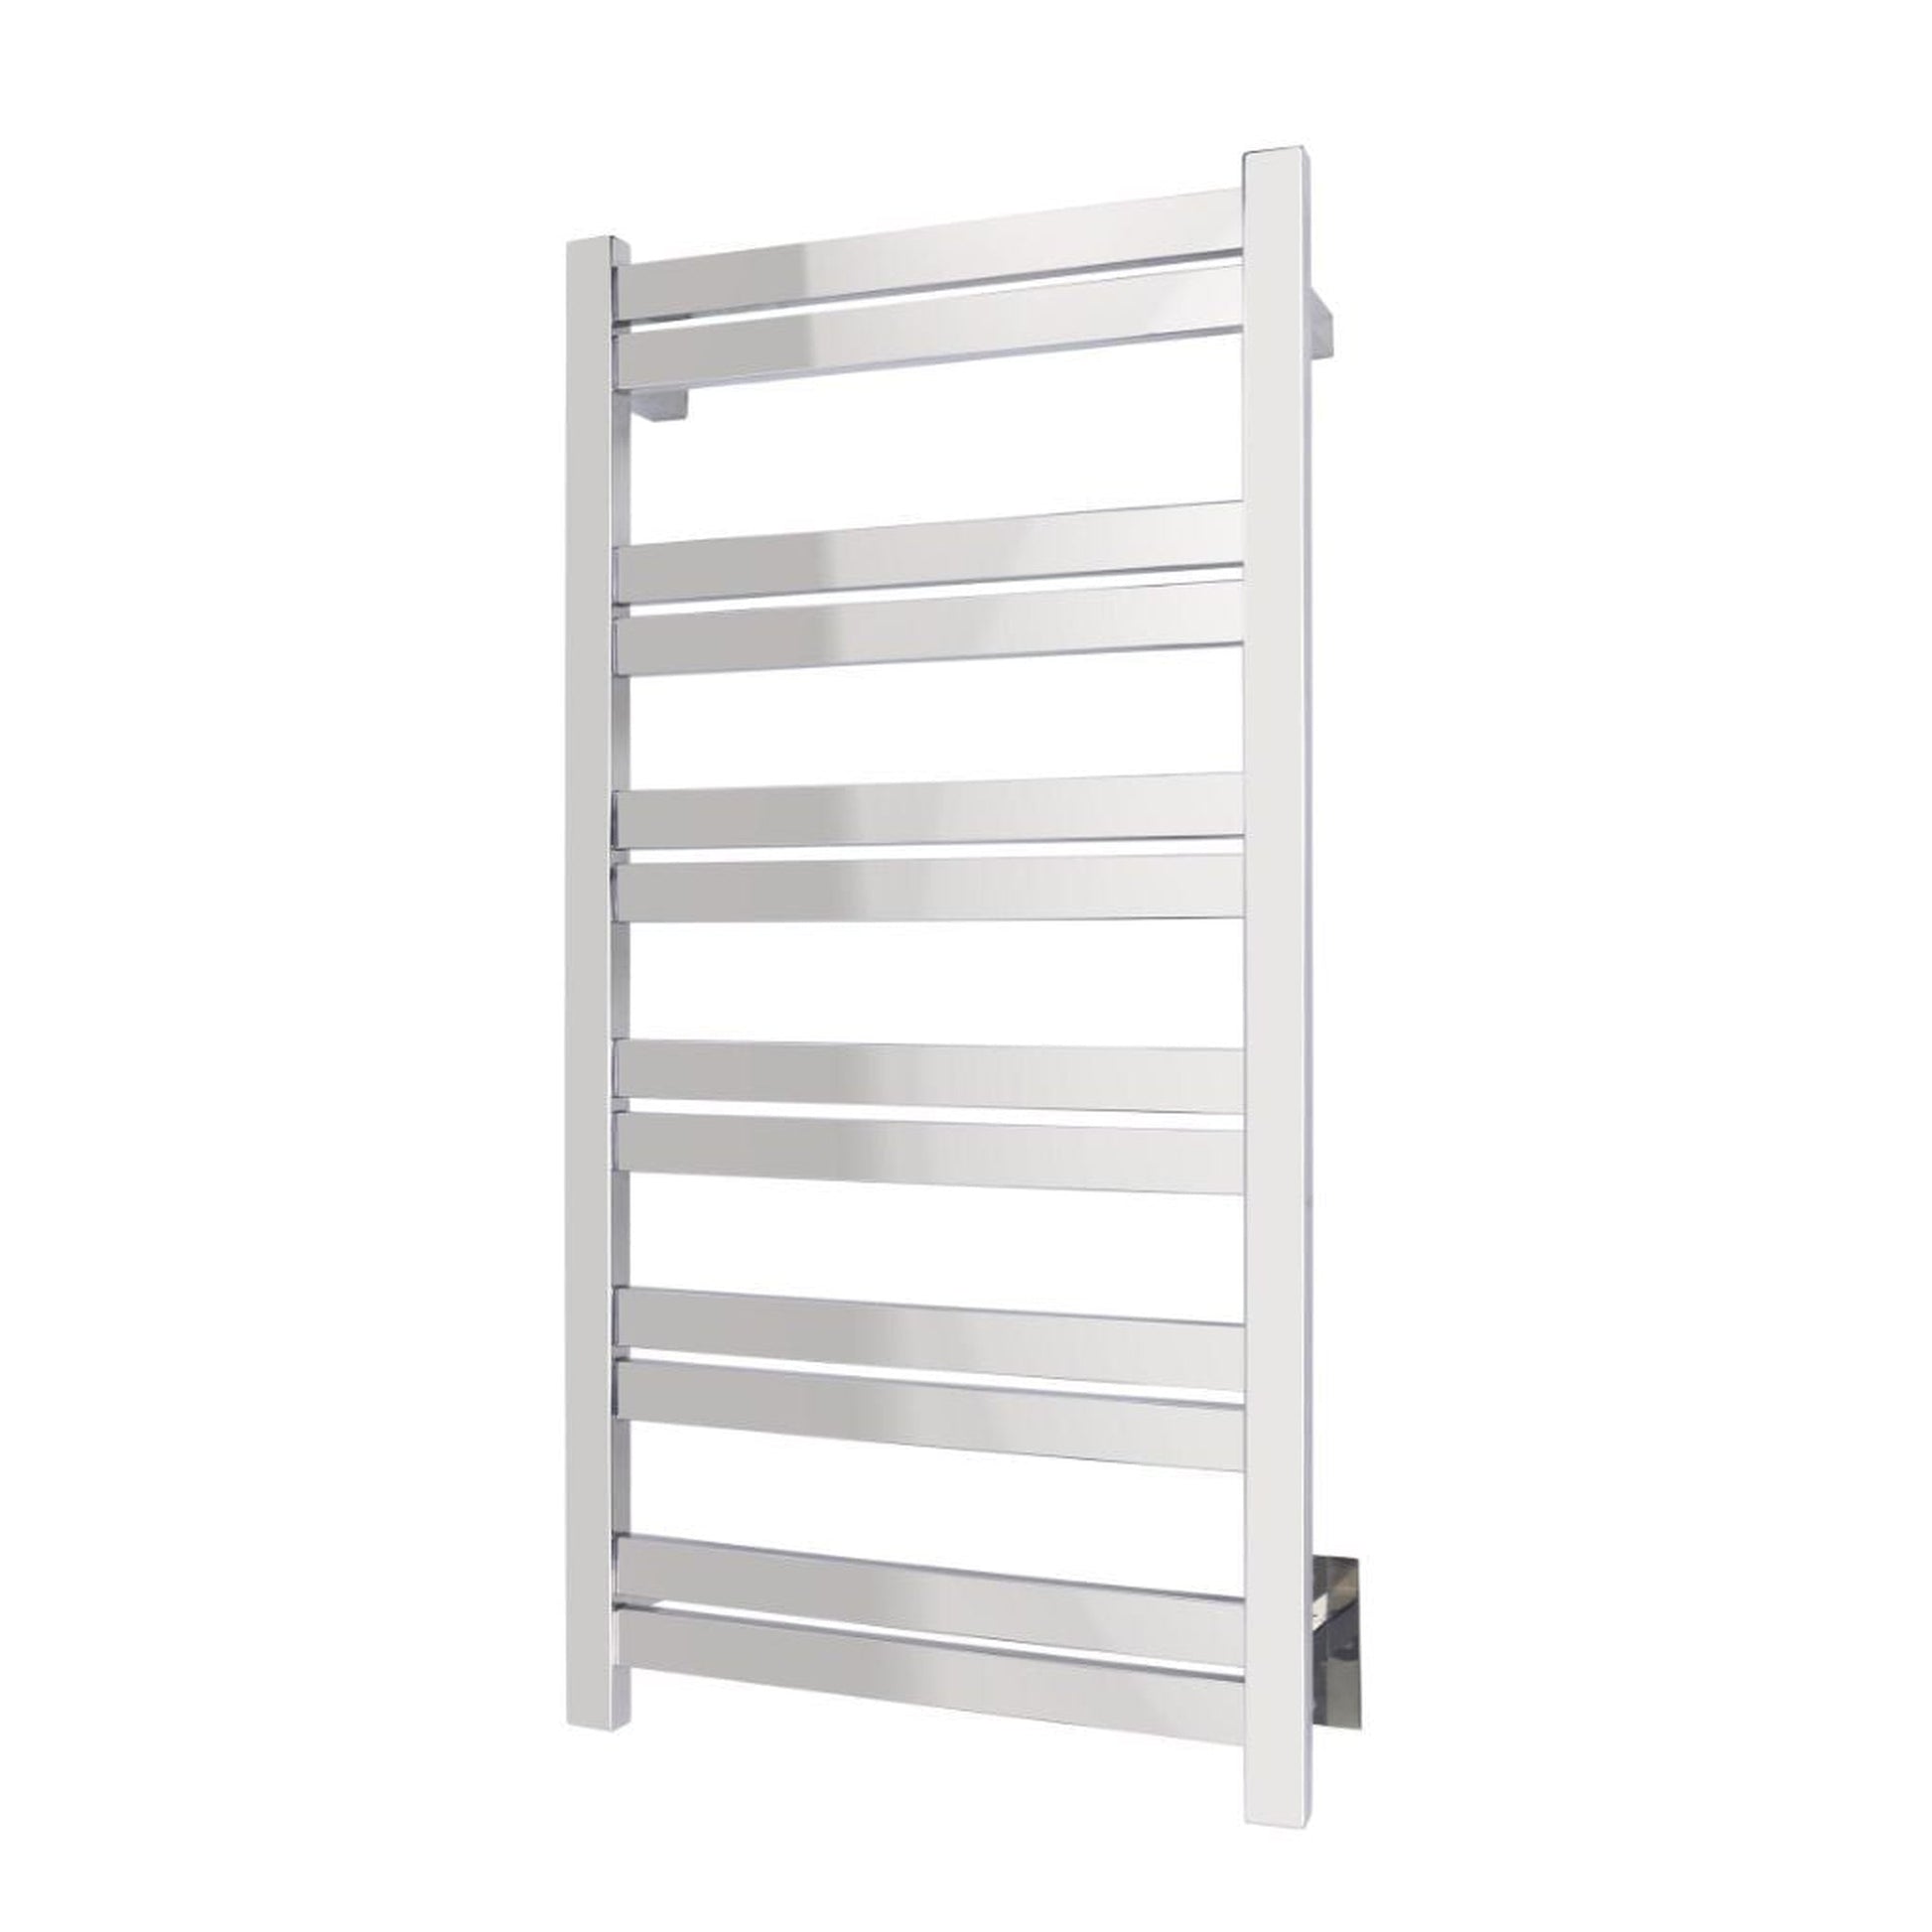 WarmlyYours Grande 12 21" x 41" Polished Stainless Steel Wall-Mounted 12-Bar Hardwired Towel Warmer